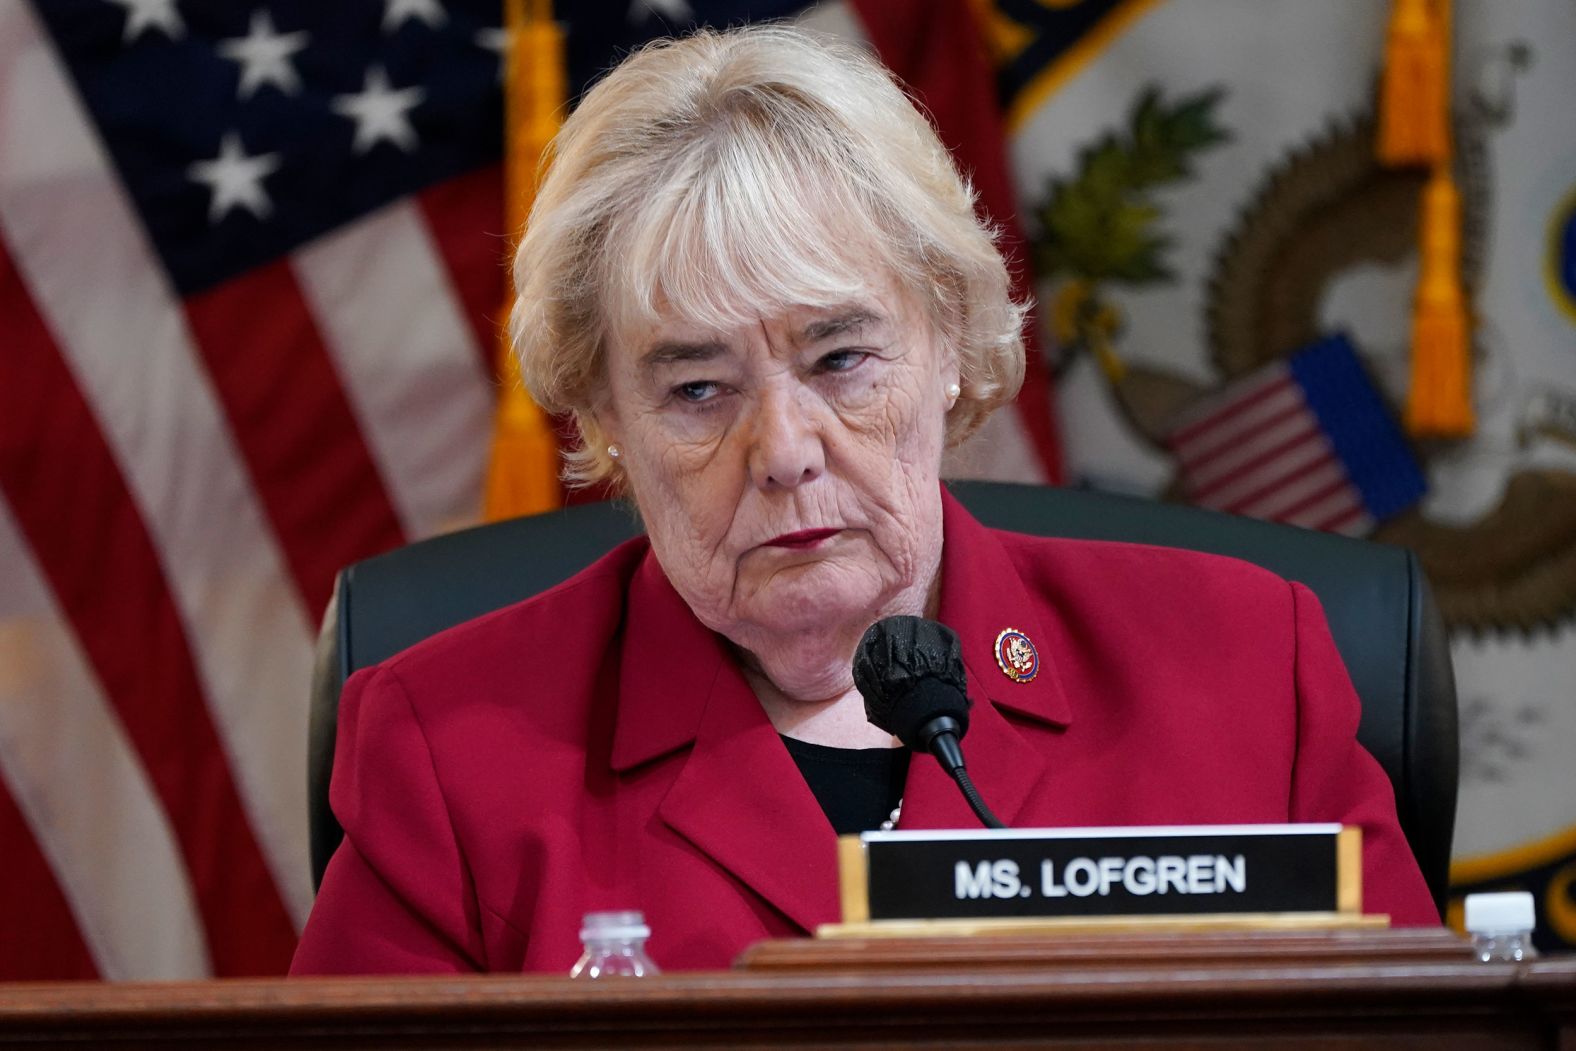 Lofgren gives an opening statement on June 13. She said the committee would demonstrate the 2020 election was not stolen, adding that the Trump campaign's <a href="index.php?page=&url=https%3A%2F%2Fwww.cnn.com%2Fpolitics%2Flive-news%2Fjanuary-6-hearings-june-13%2Fh_585d2f8227c3a702caa6087b899e0d74" target="_blank">"big lie was also a big rip-off." </a>